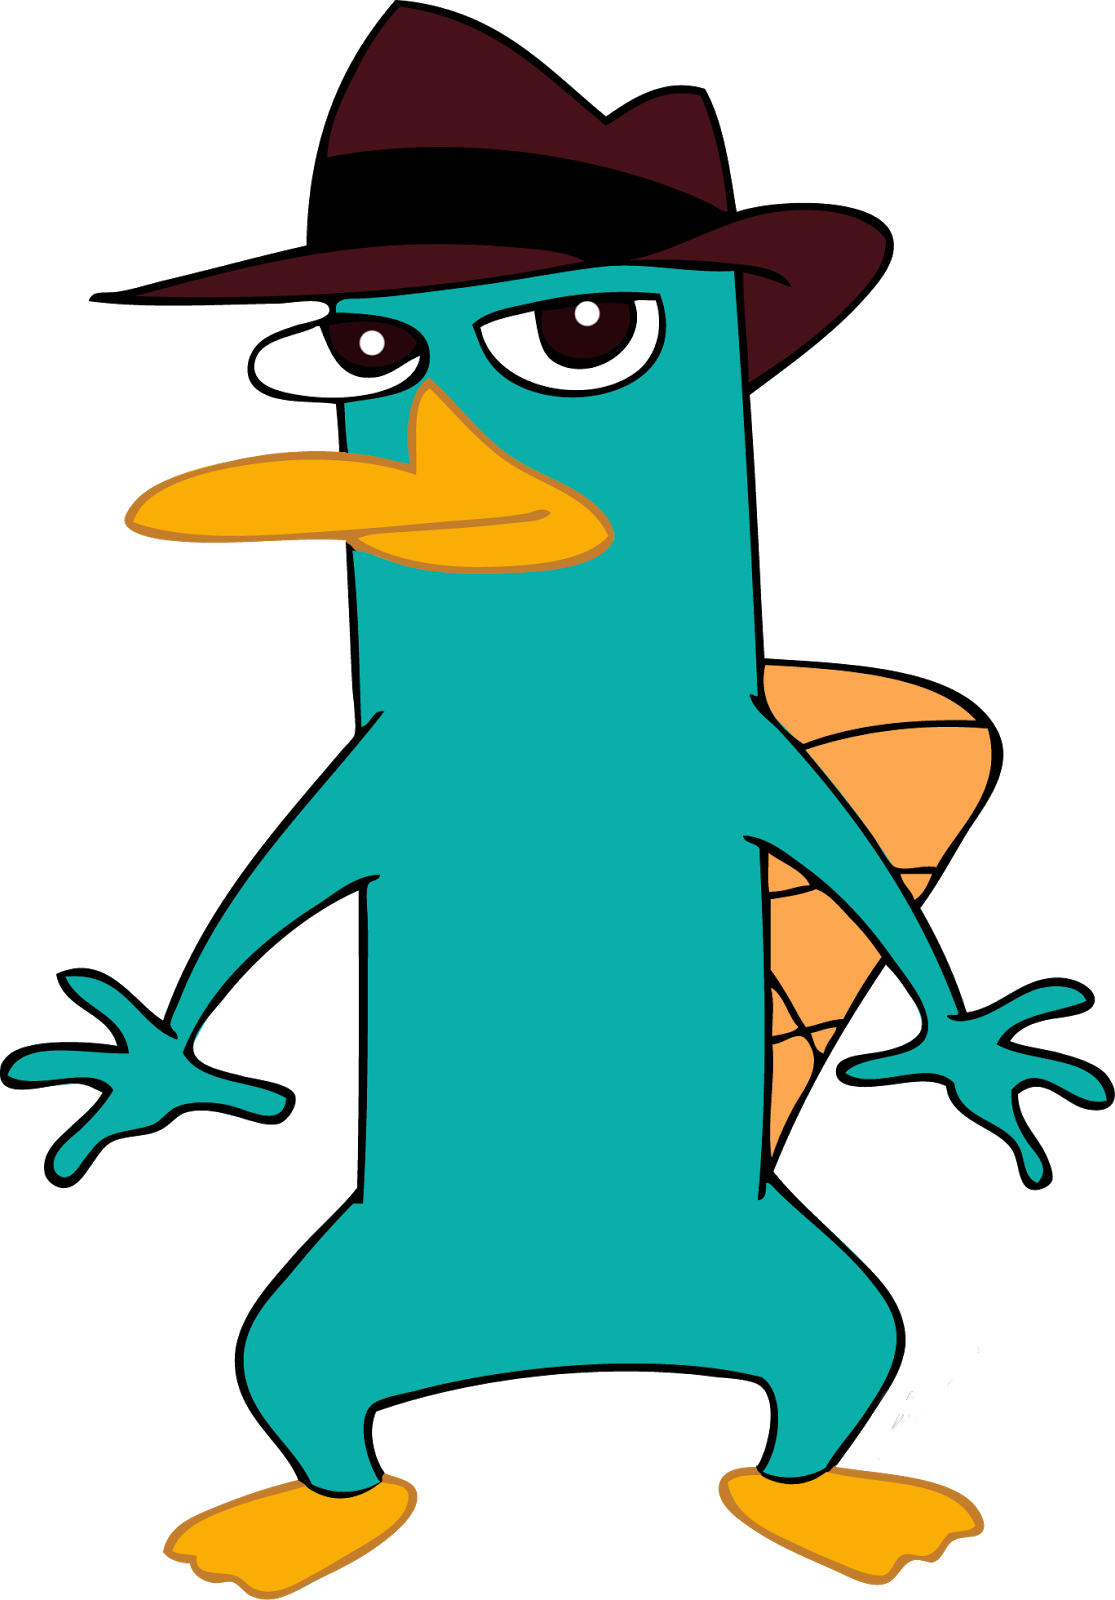 5 Kbyte, V - Agent Perry The Platypus.